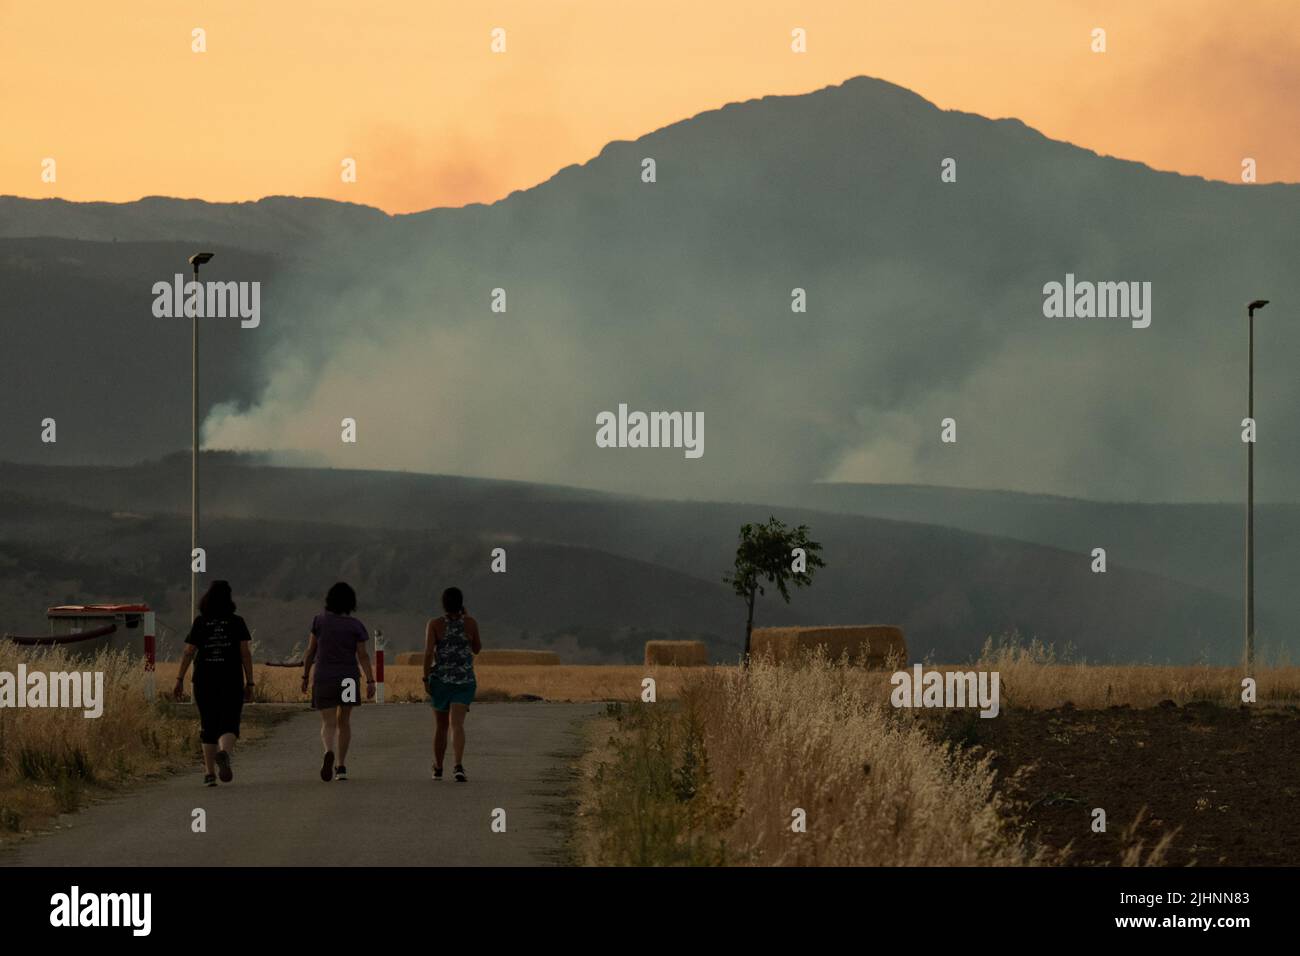 Guadalajara, Spain. 19th July, 2022. People are seen near Valdepeñas de la Sierra, where several fires have forced to evacuate nearly 70 residents from the area. Wildfires have broken out across Spain amid a severe heatwave. Credit: Marcos del Mazo/Alamy Live News Stock Photo